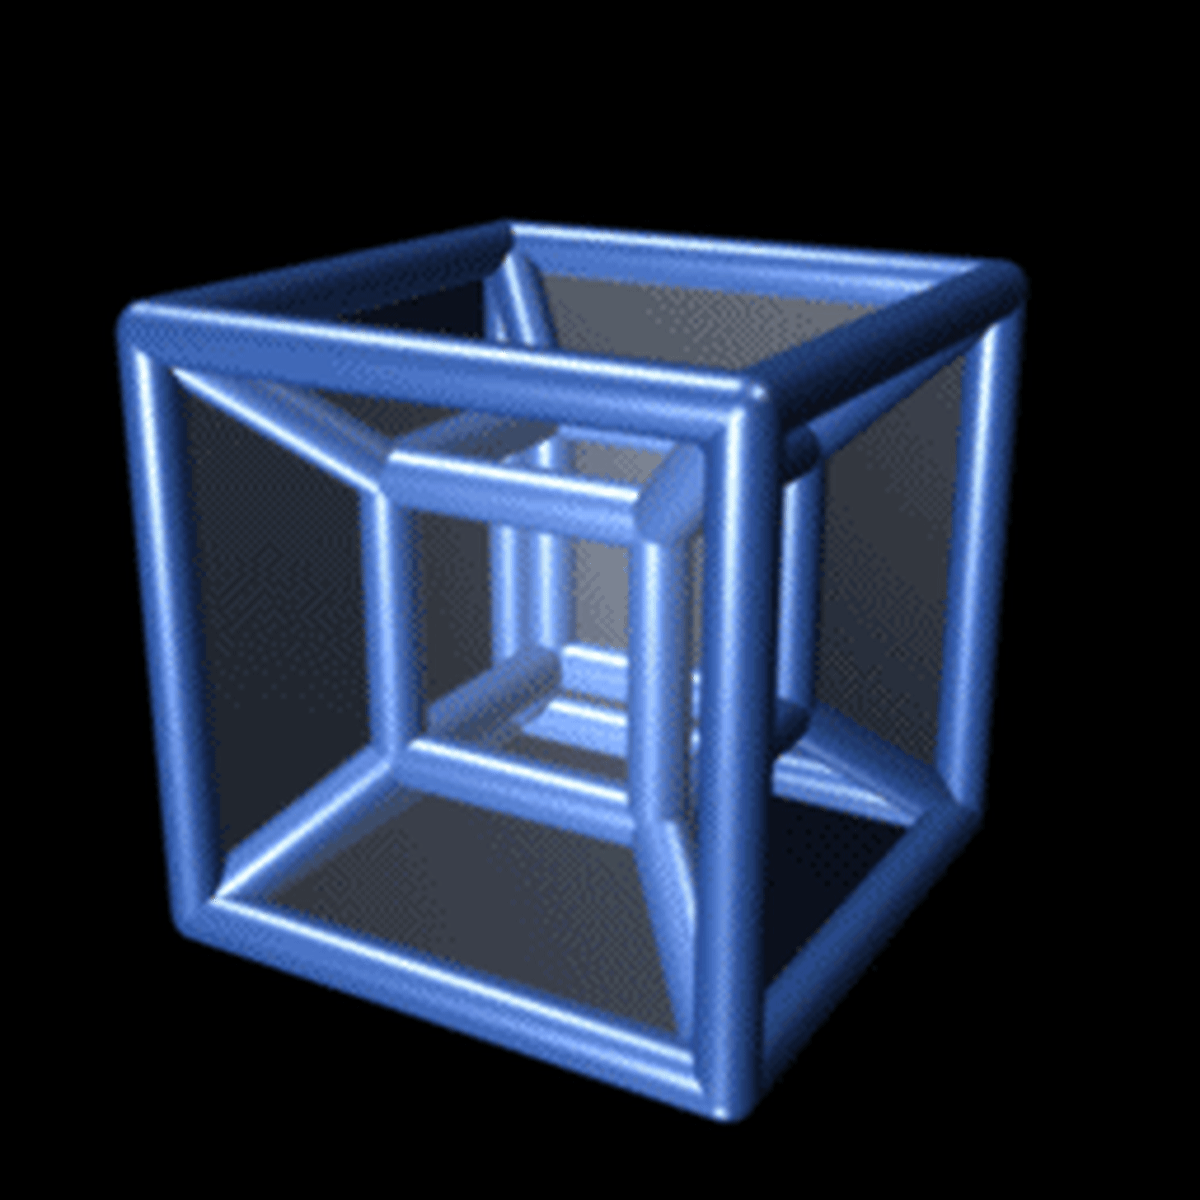 4D: Presentation and Impressions on the 4th Dimension